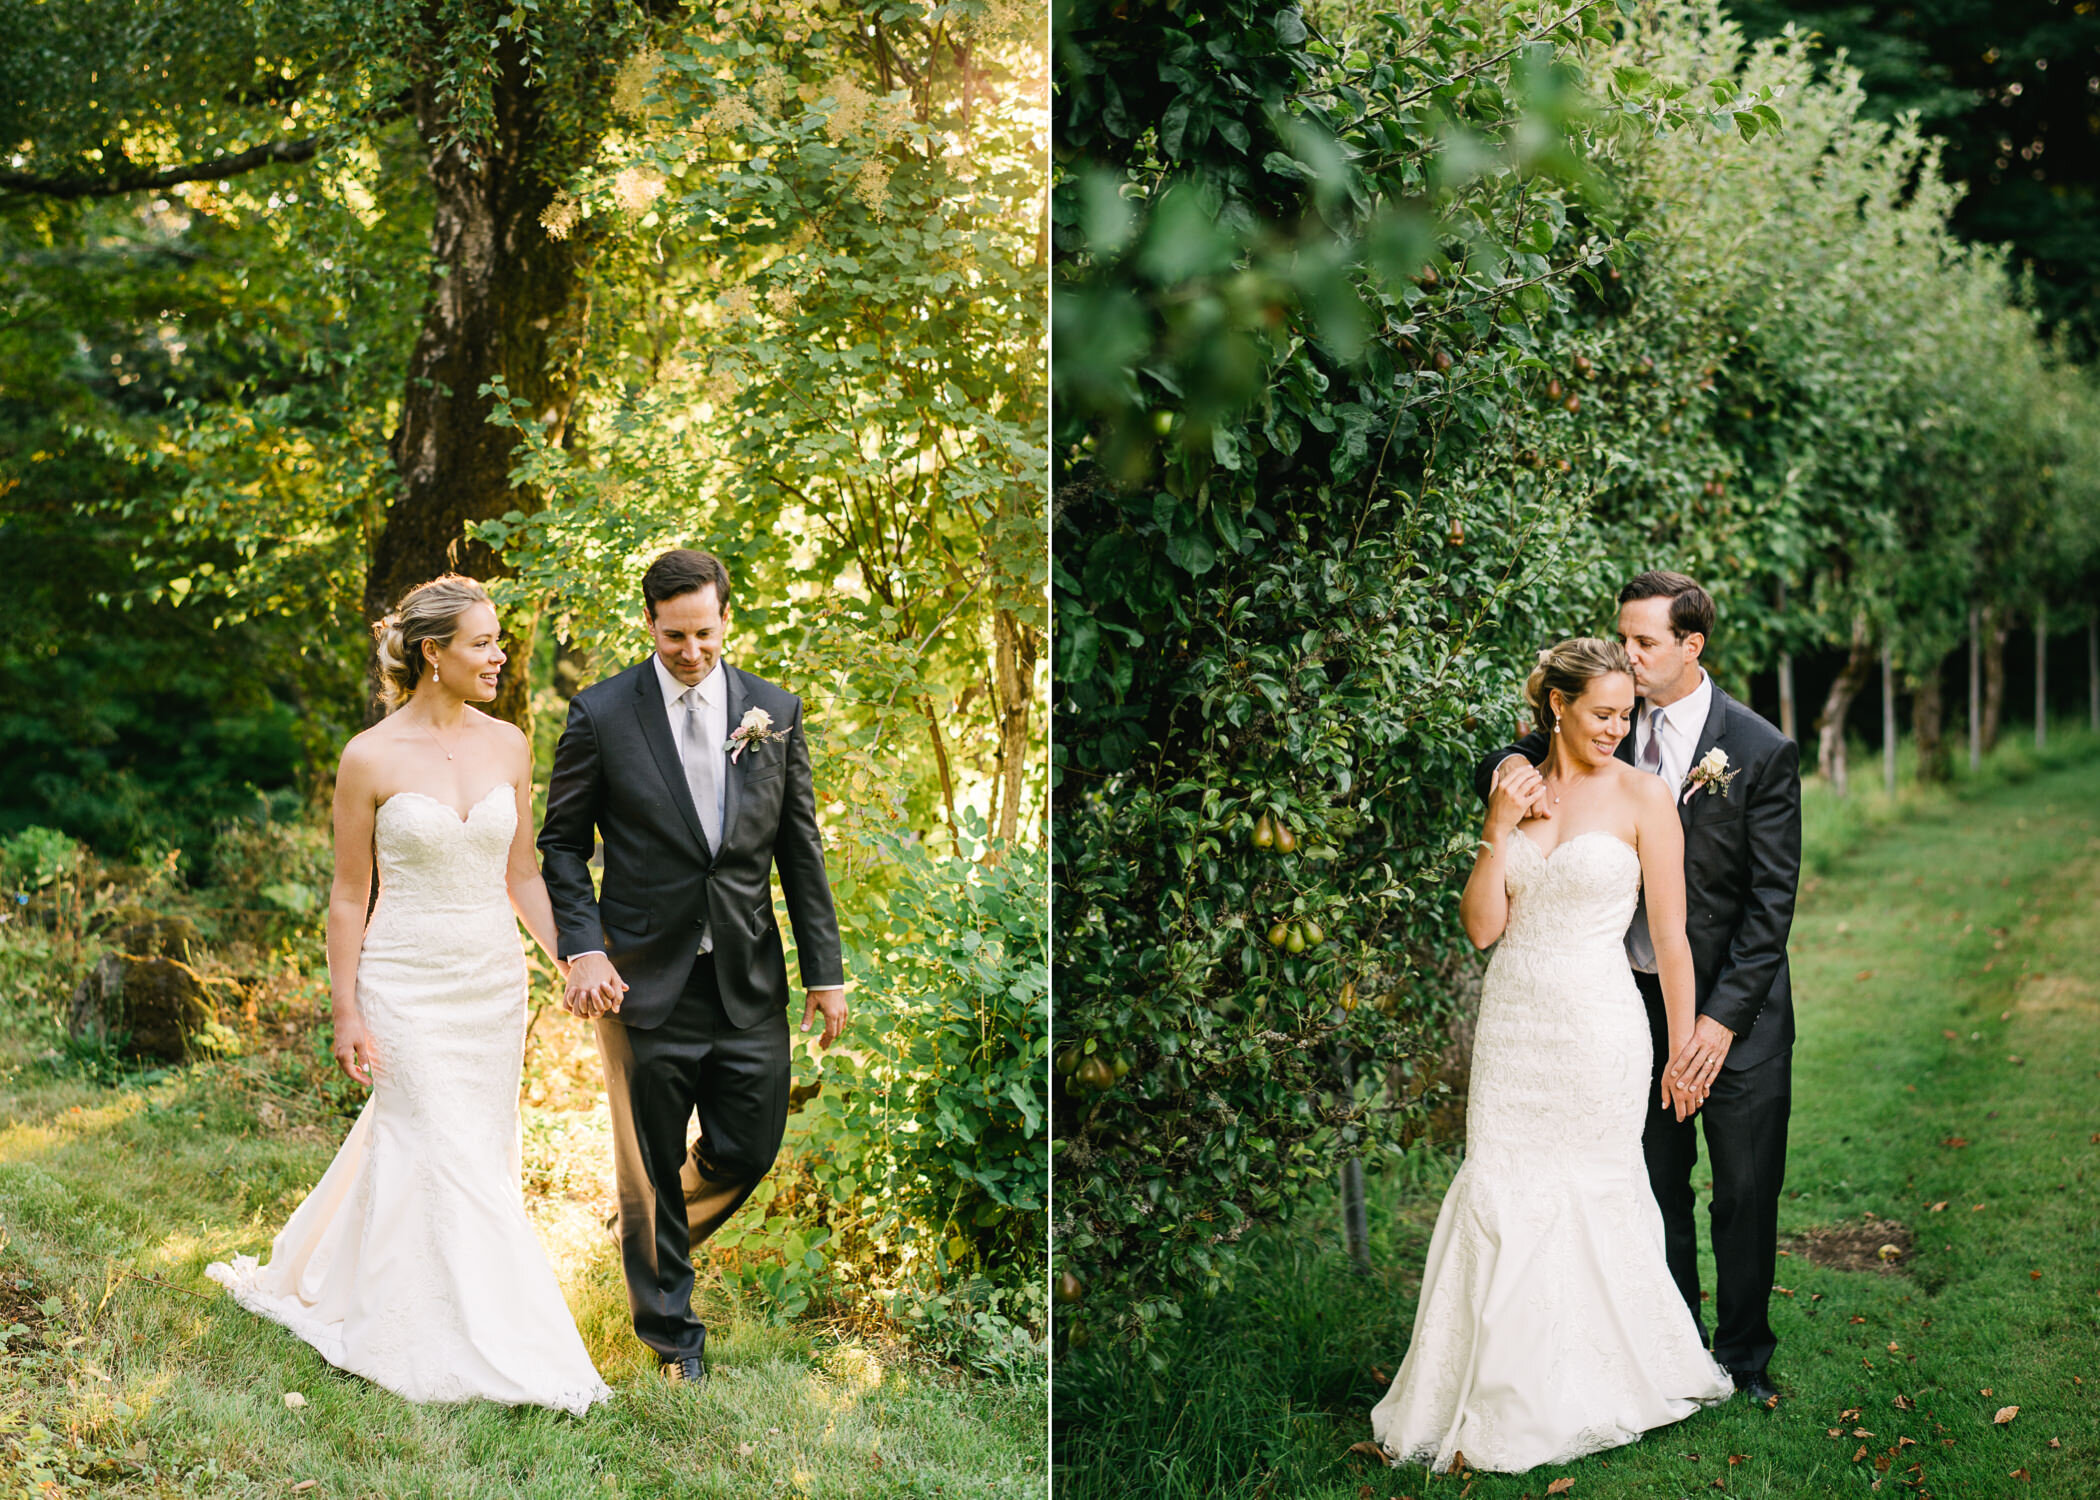  Bride and groom portrait next to pear orchard 